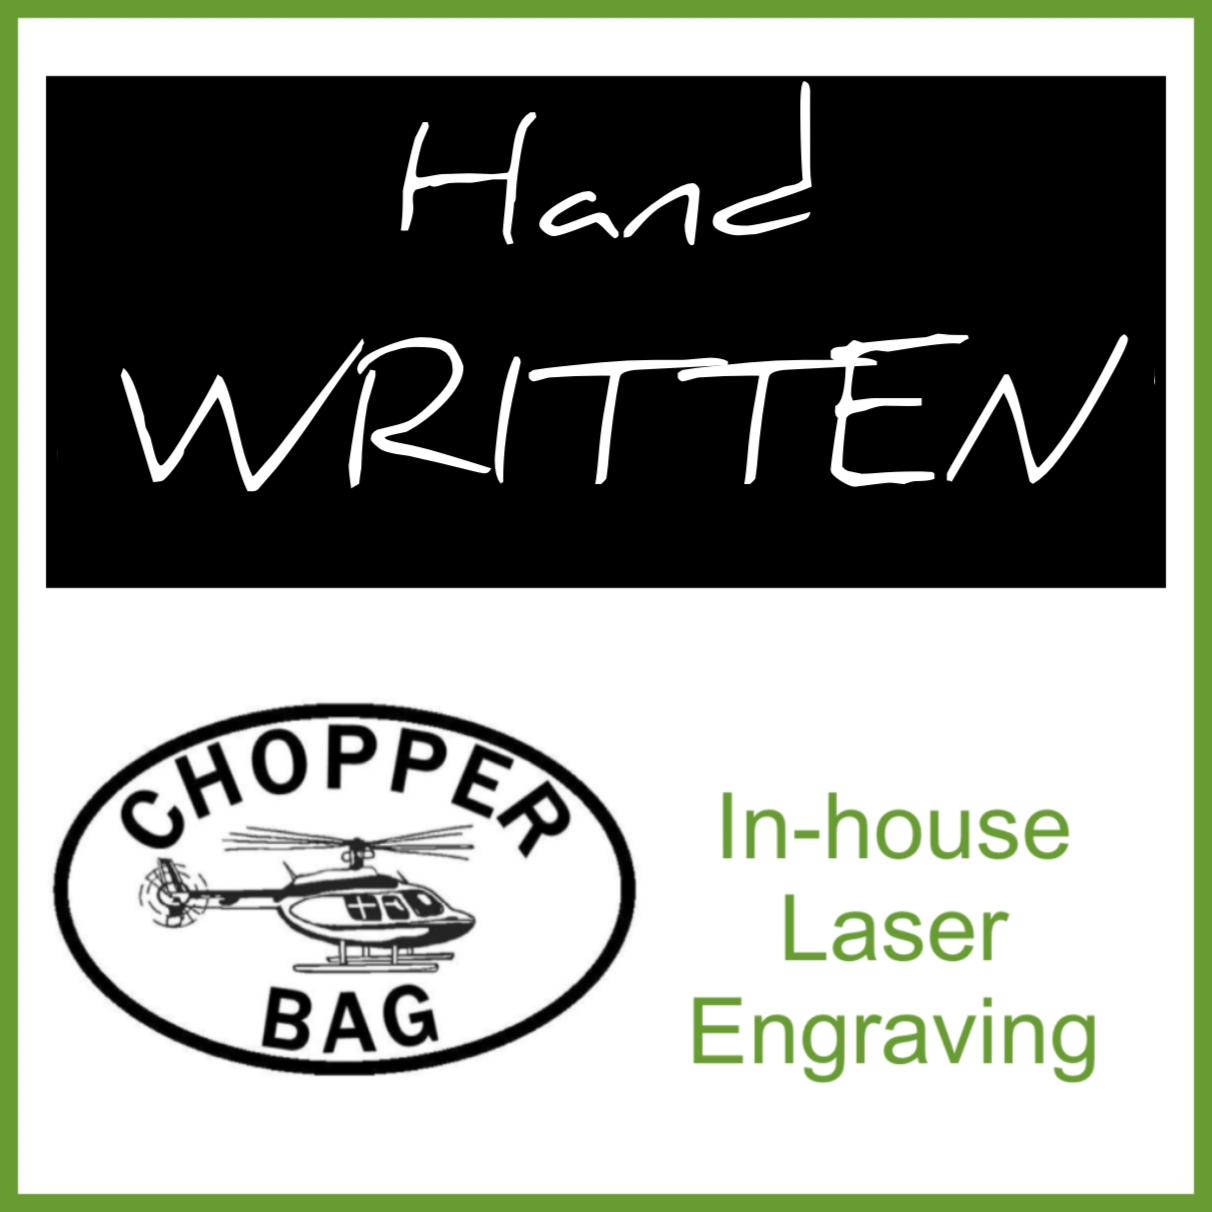 Laser Engraving - Basic Text (FREE with CHOPPER BAG ORDER)